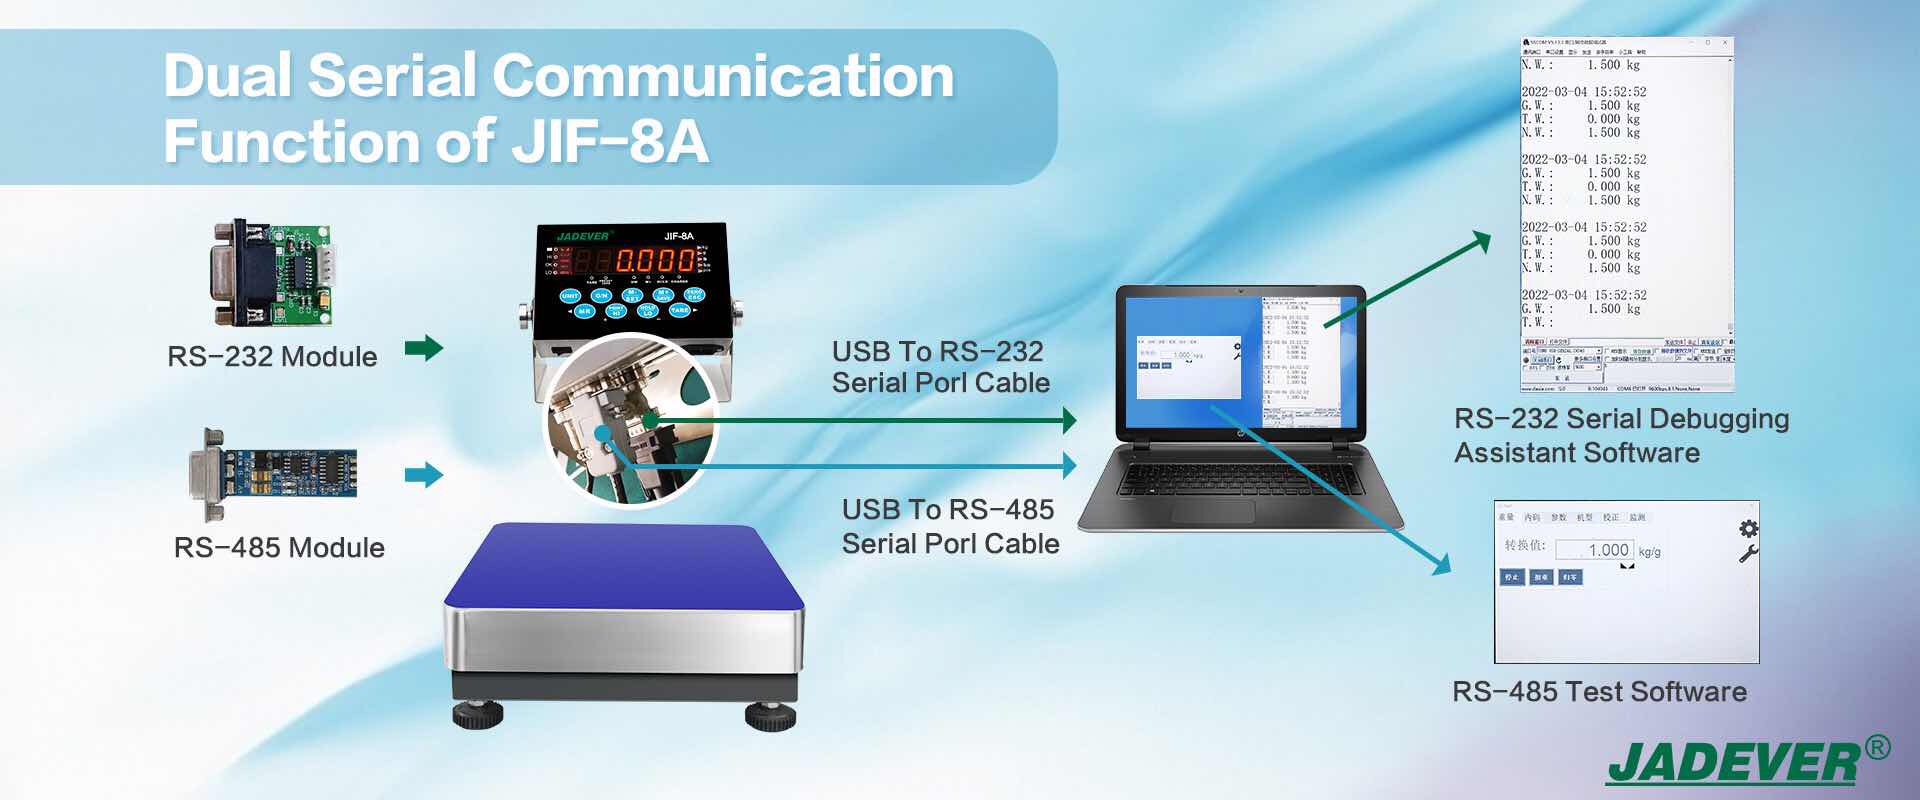 Dual Serial Communication Function of JIF-8A